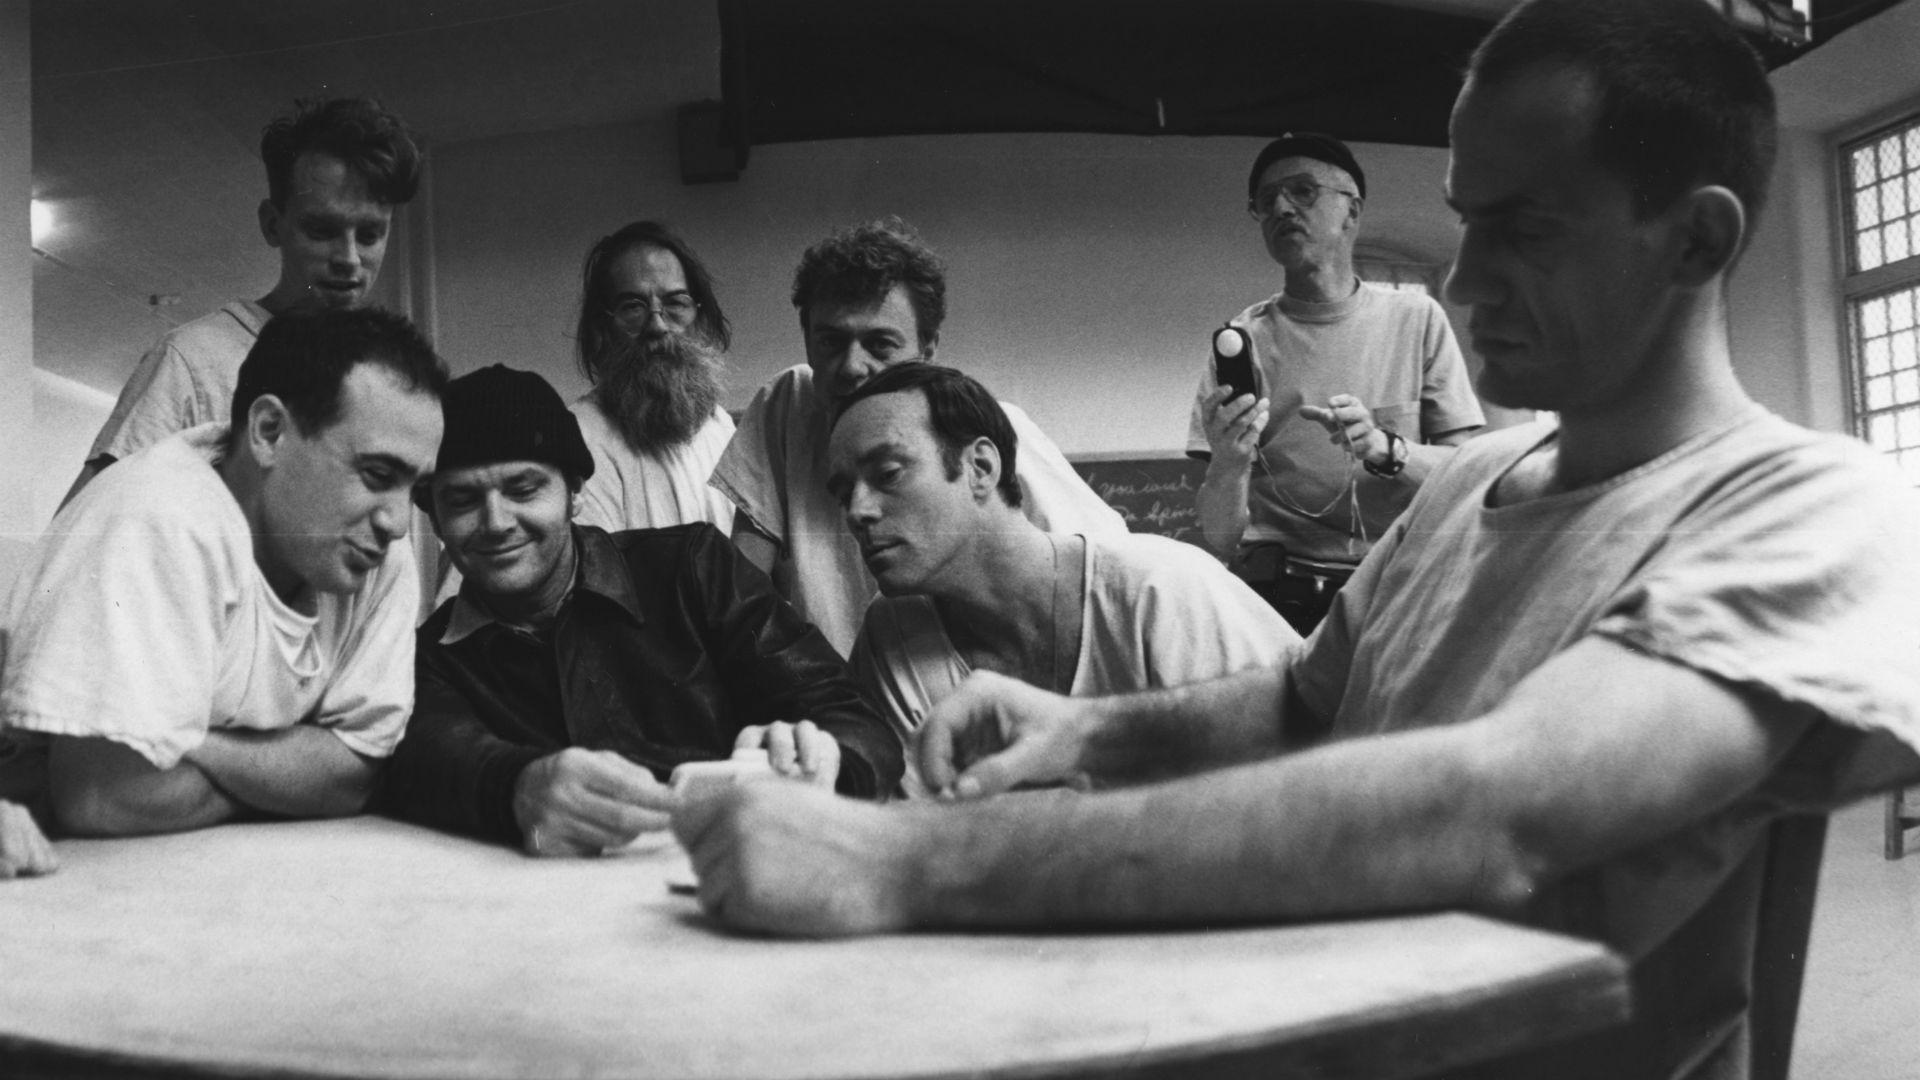 How One Flew Over the Cuckoo's Nest incubated a generation